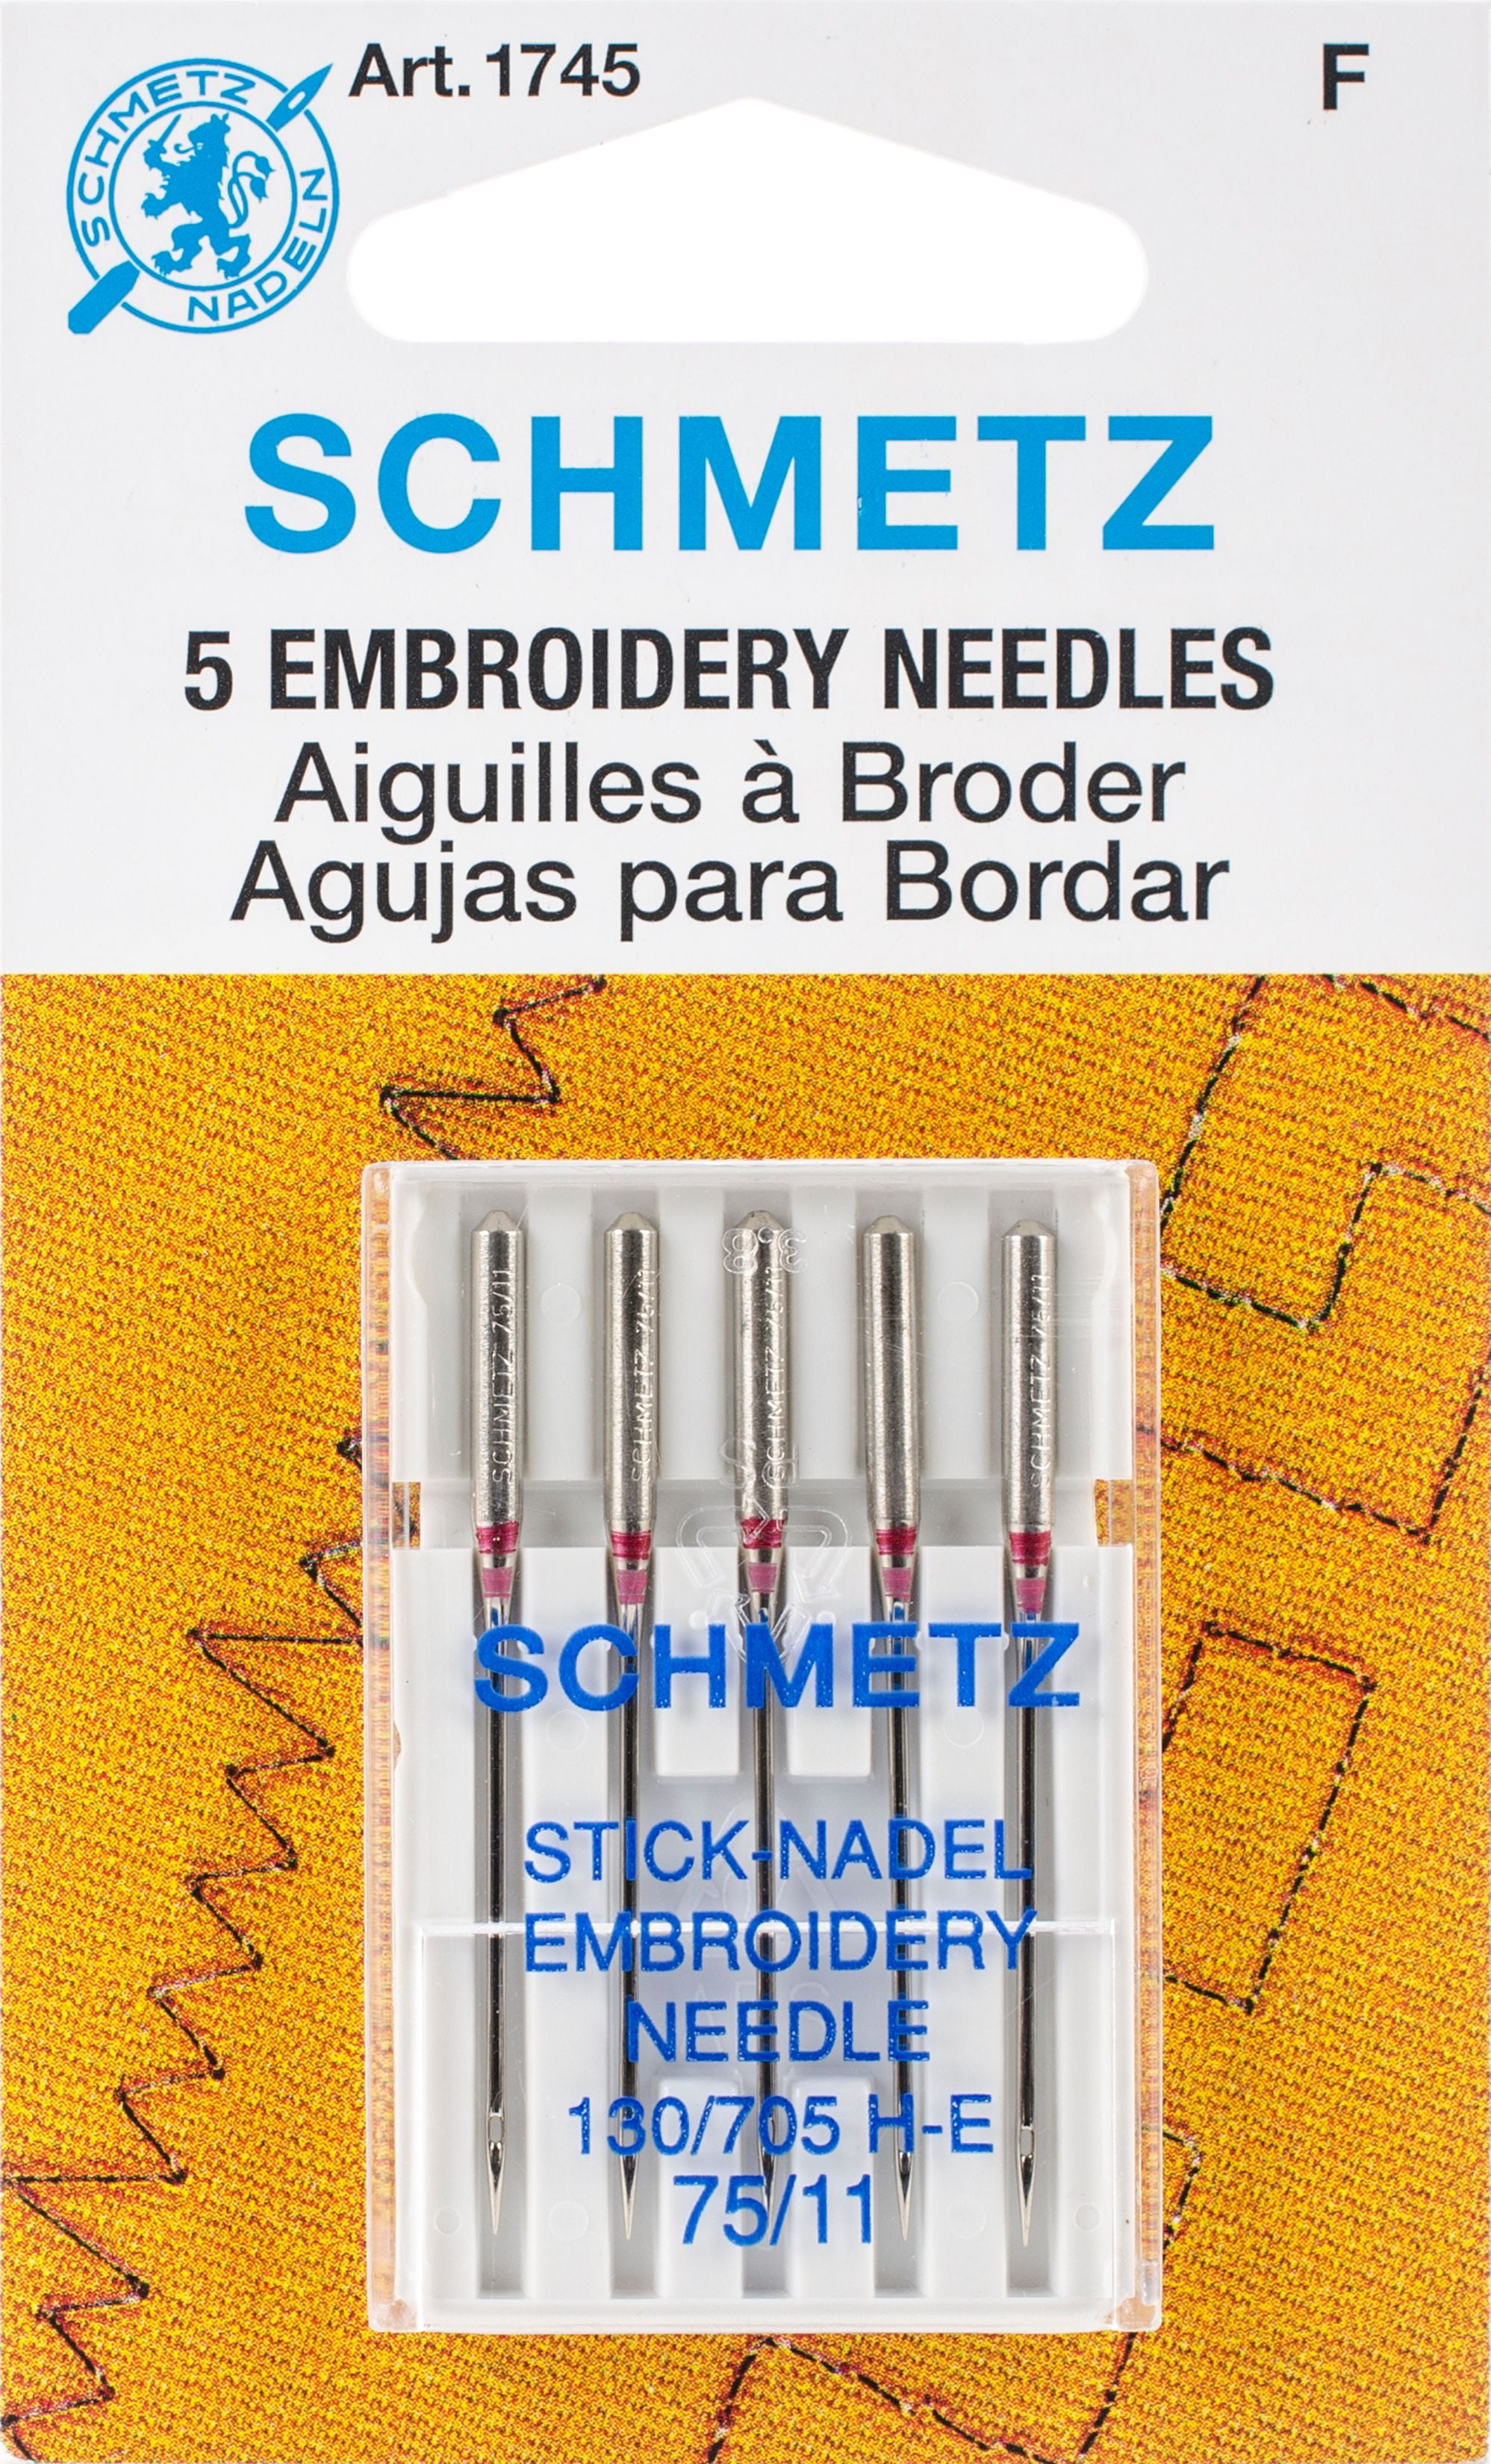 40 Pcs Embroidery Sewing Machine Needles Size 75/11 80/12 90/14 100/16 HAx1 Sewing Needles by STARVAST for Brother Singer Sewing Machine 4 Pack of 10 Needles 